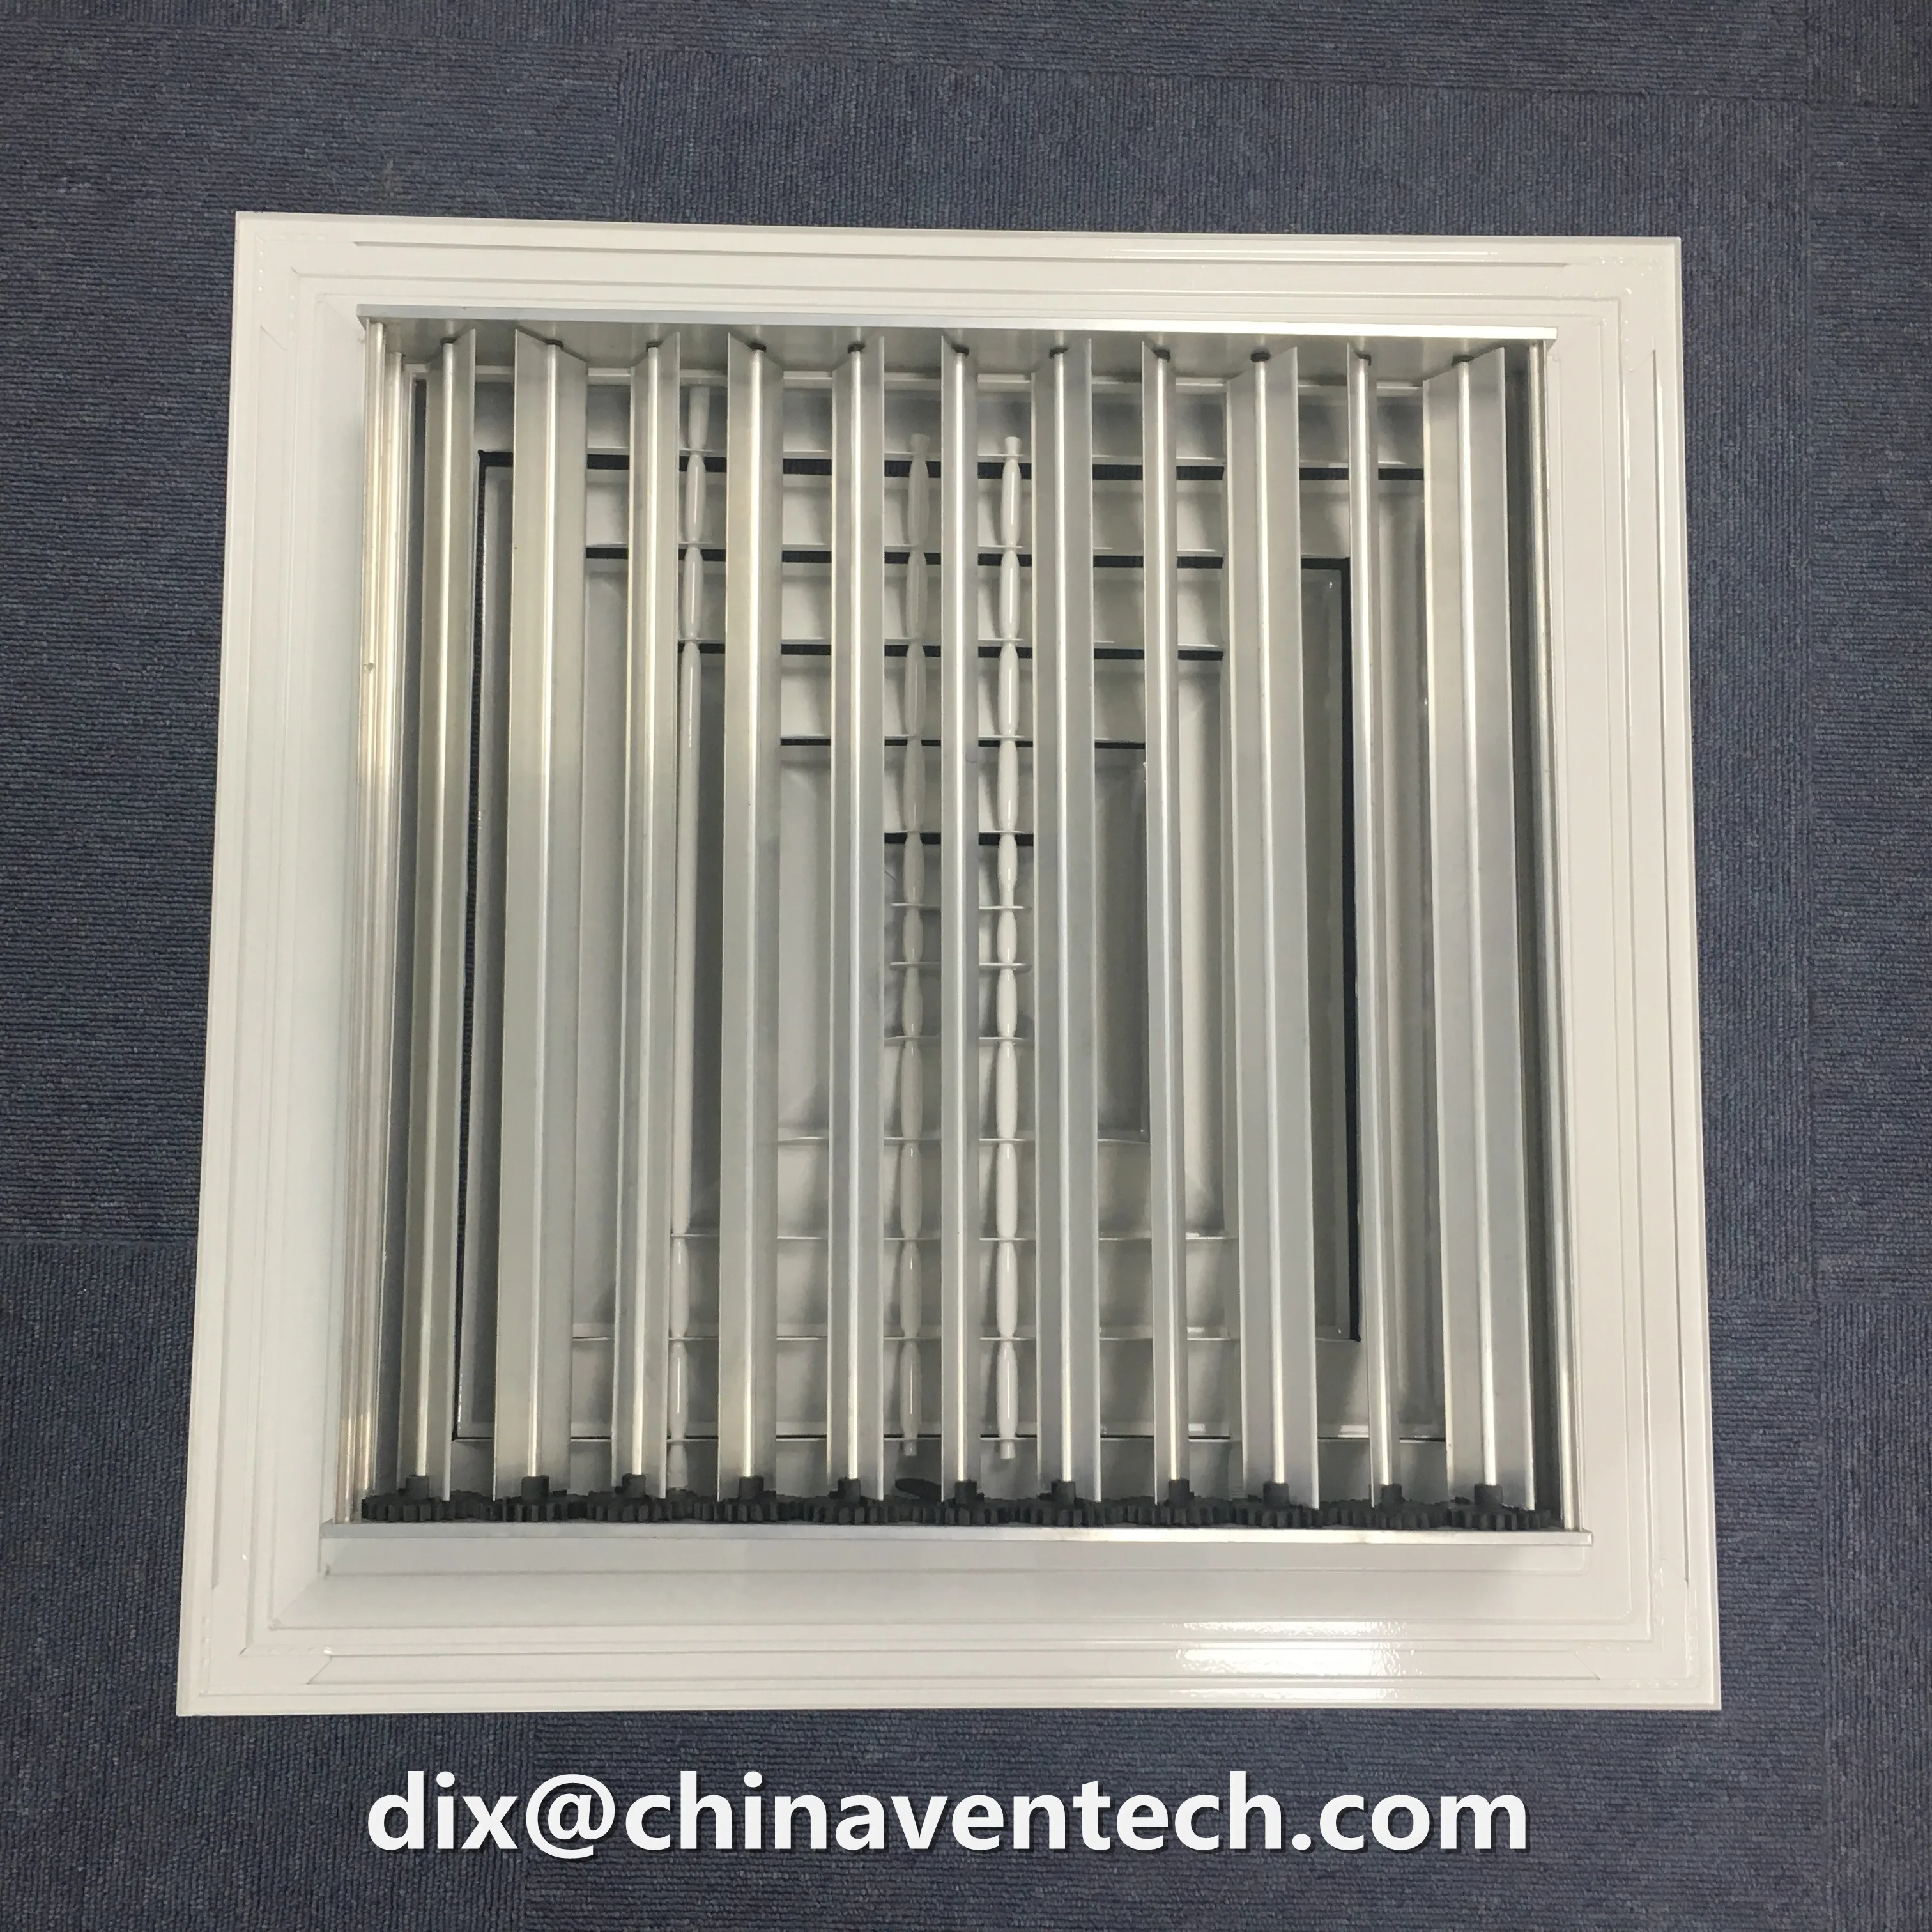 Hvac system air conditioning ceiling square 4 way air duct diffuser